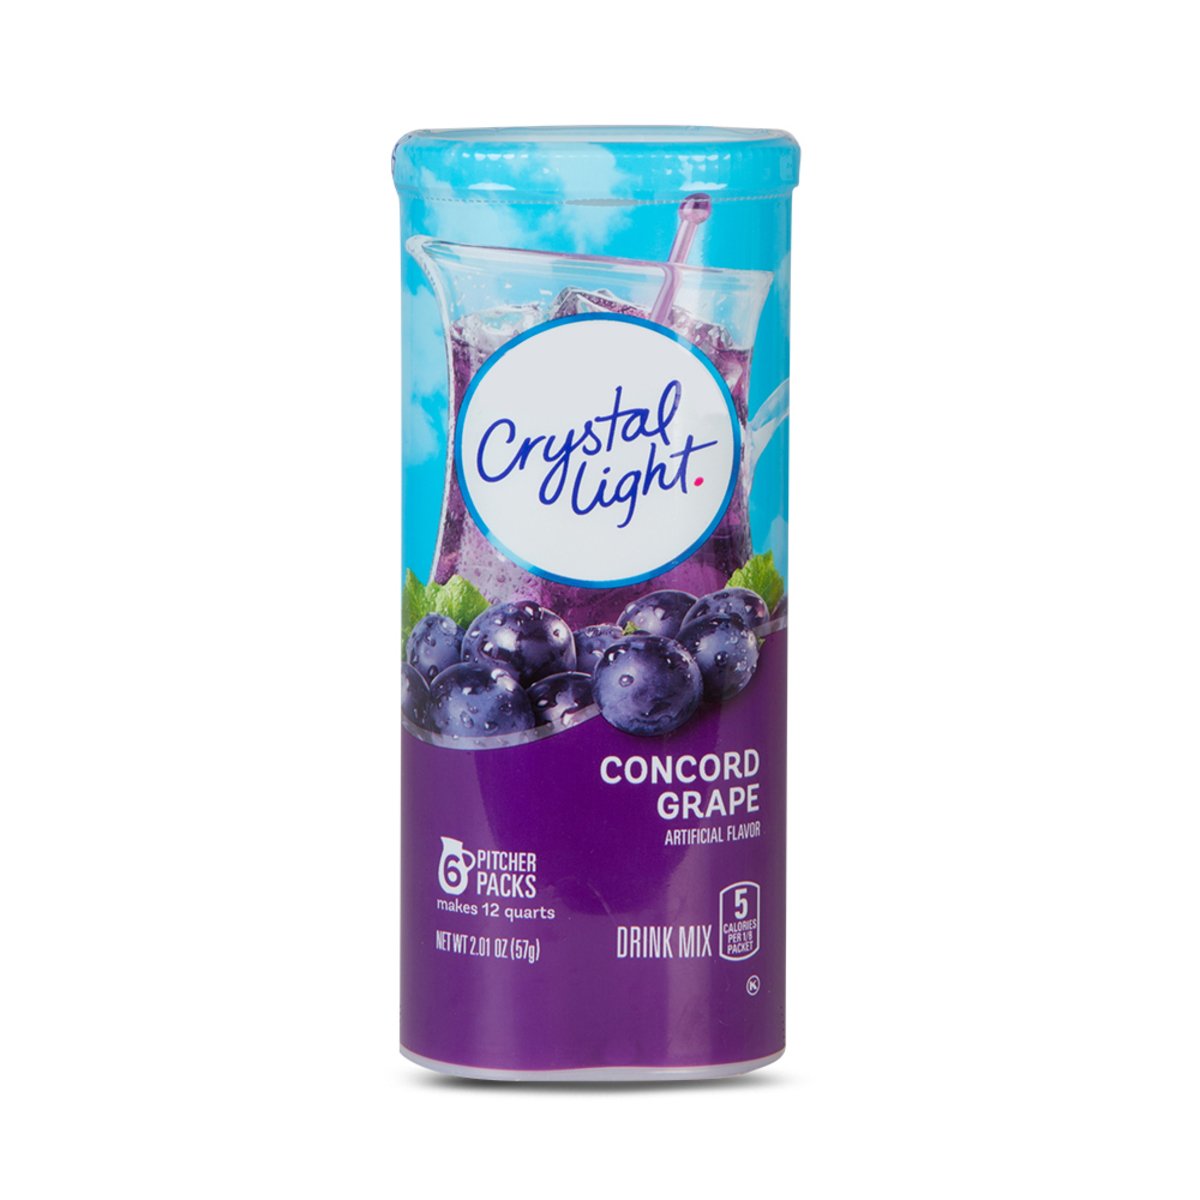 Crystal Light Drink Mix Concord Grape 57 g